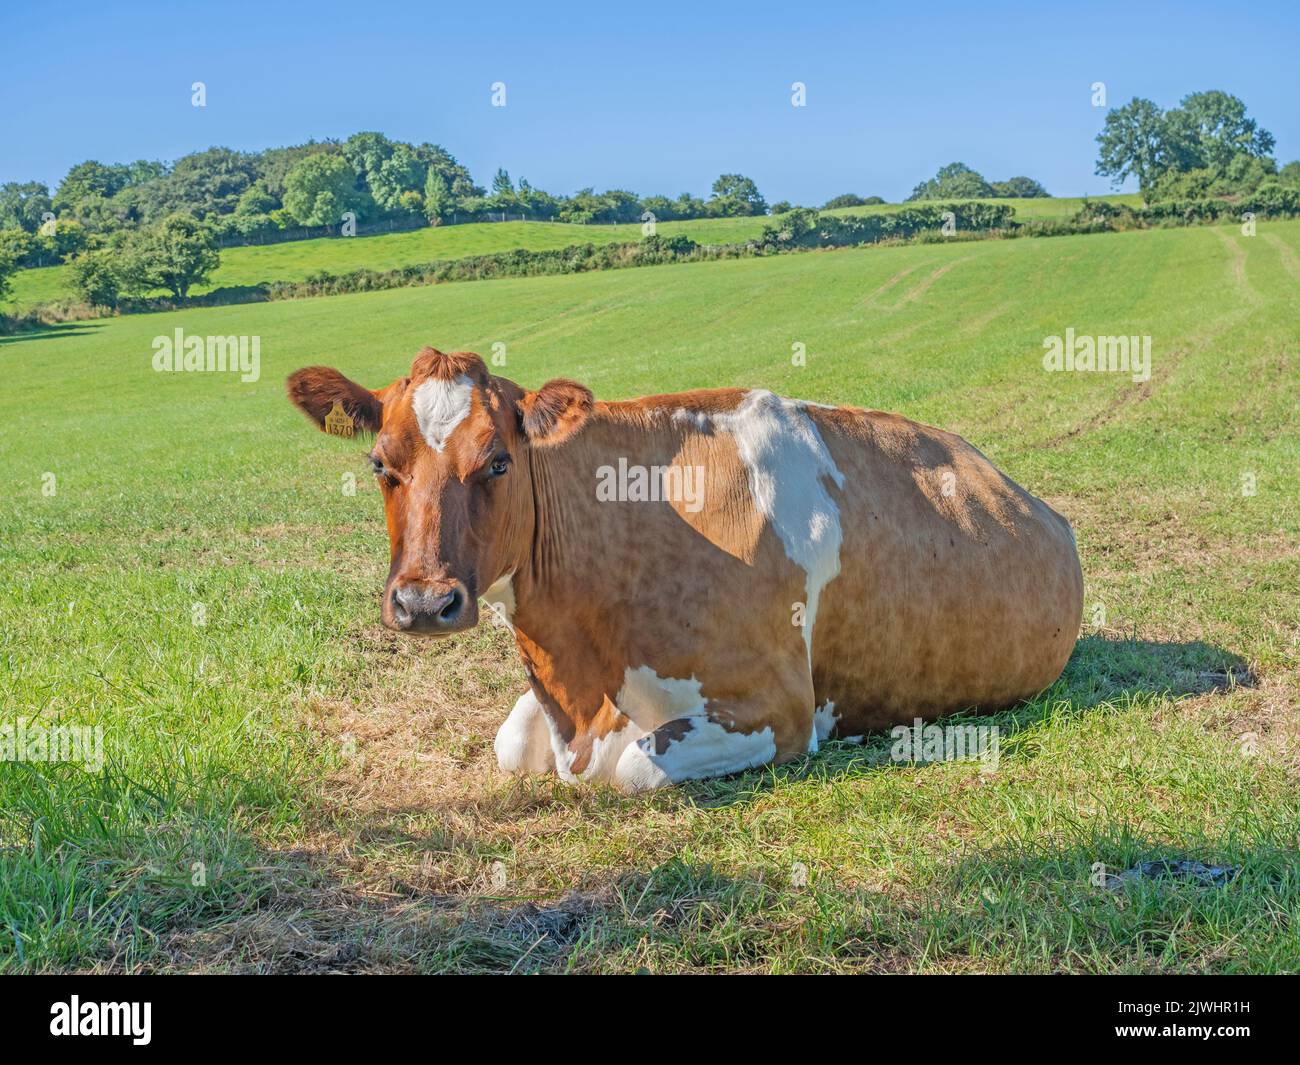 A cow resting in a field in the Cloughanover district, near Headford in County Galway, Ireland. Stock Photo